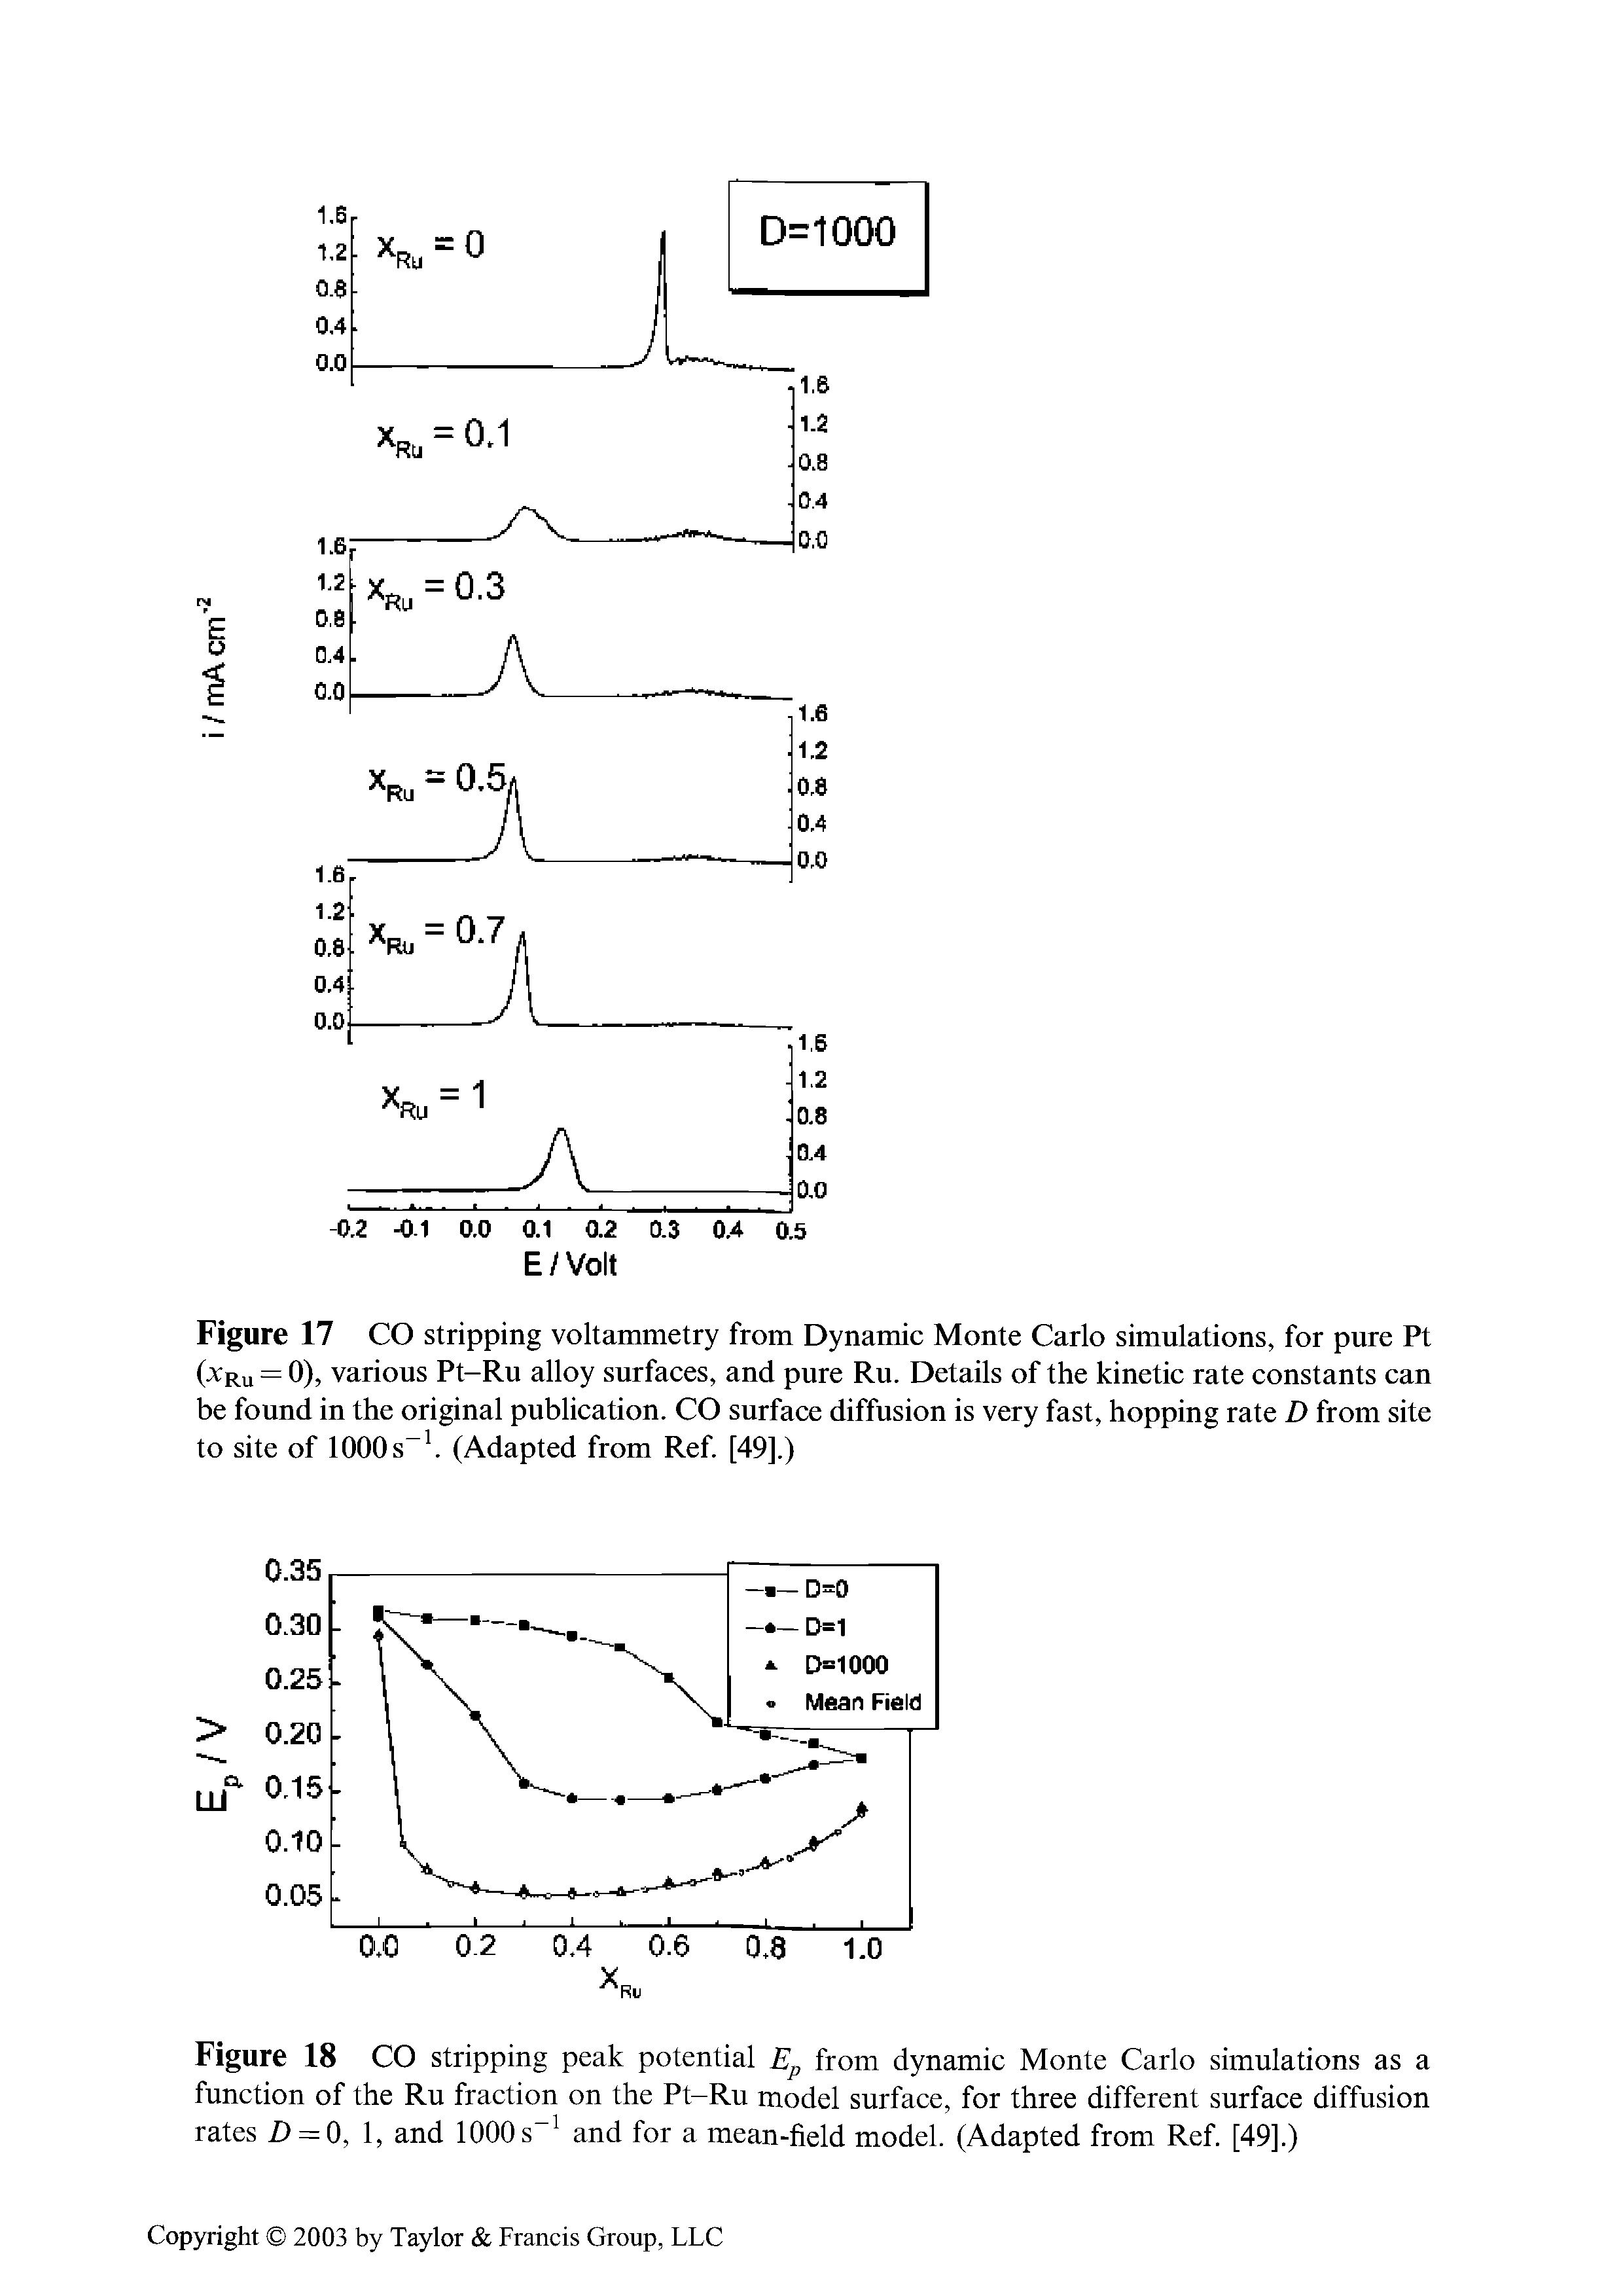 Figure 17 CO stripping voltammetry from Dynamic Monte Carlo simulations, for pure Pt ( Ru = 0), various Pt-Ru alloy surfaces, and pure Ru. Details of the kinetic rate constants can be found in the original publication. CO surface diffusion is very fast, hopping rate D from site to site of 1000s . (Adapted from Ref. [49].)...